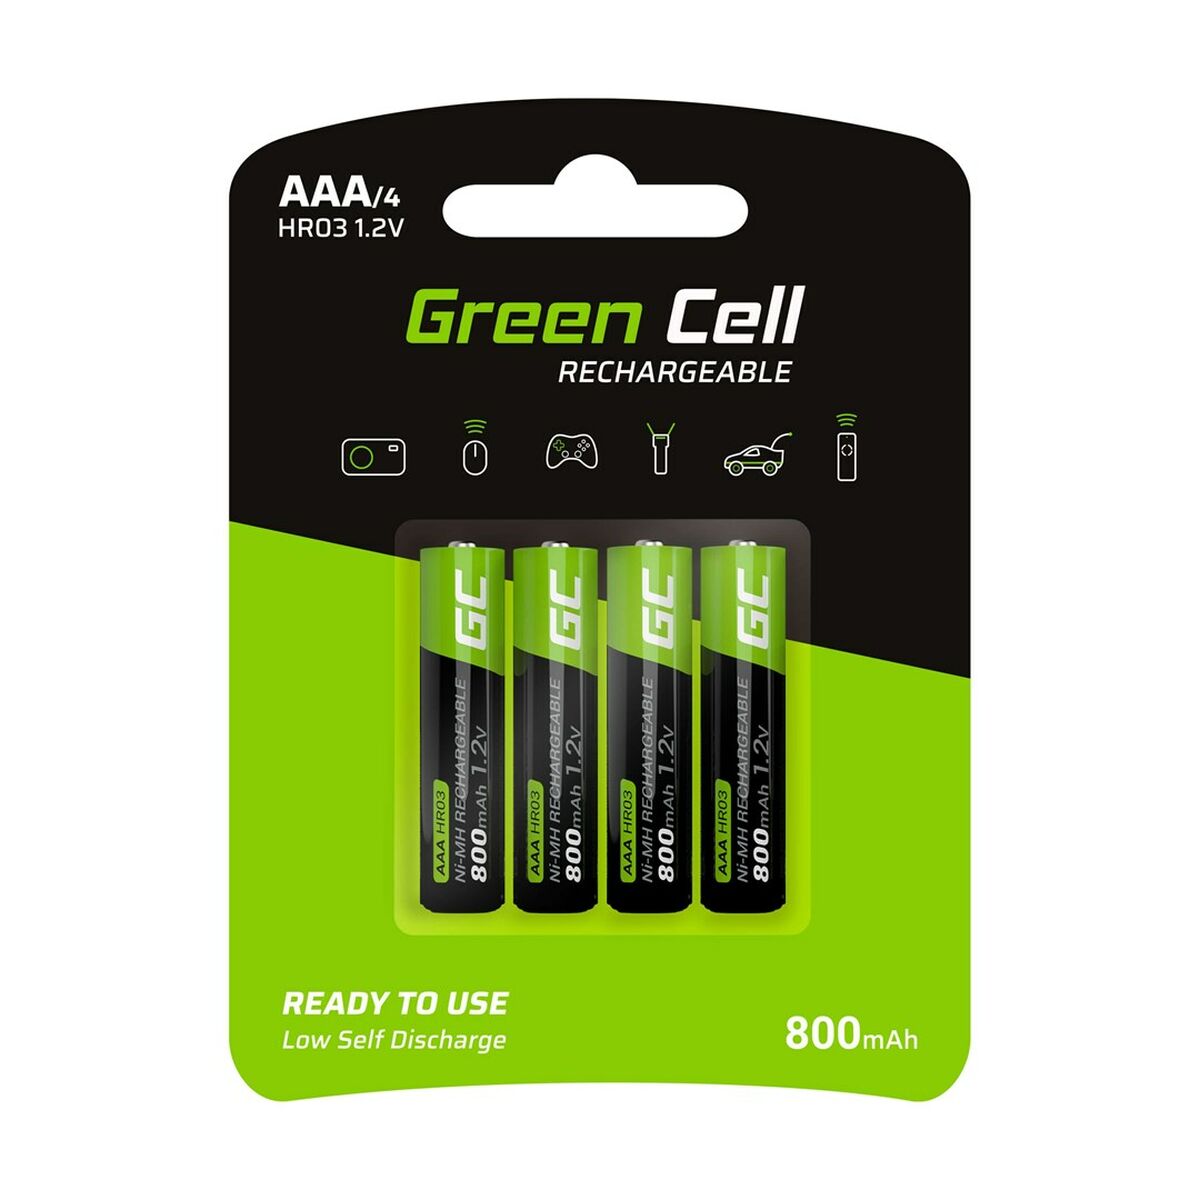 Piles Rechargeables Green Cell GR04 800 mAh 1,2 V AAA